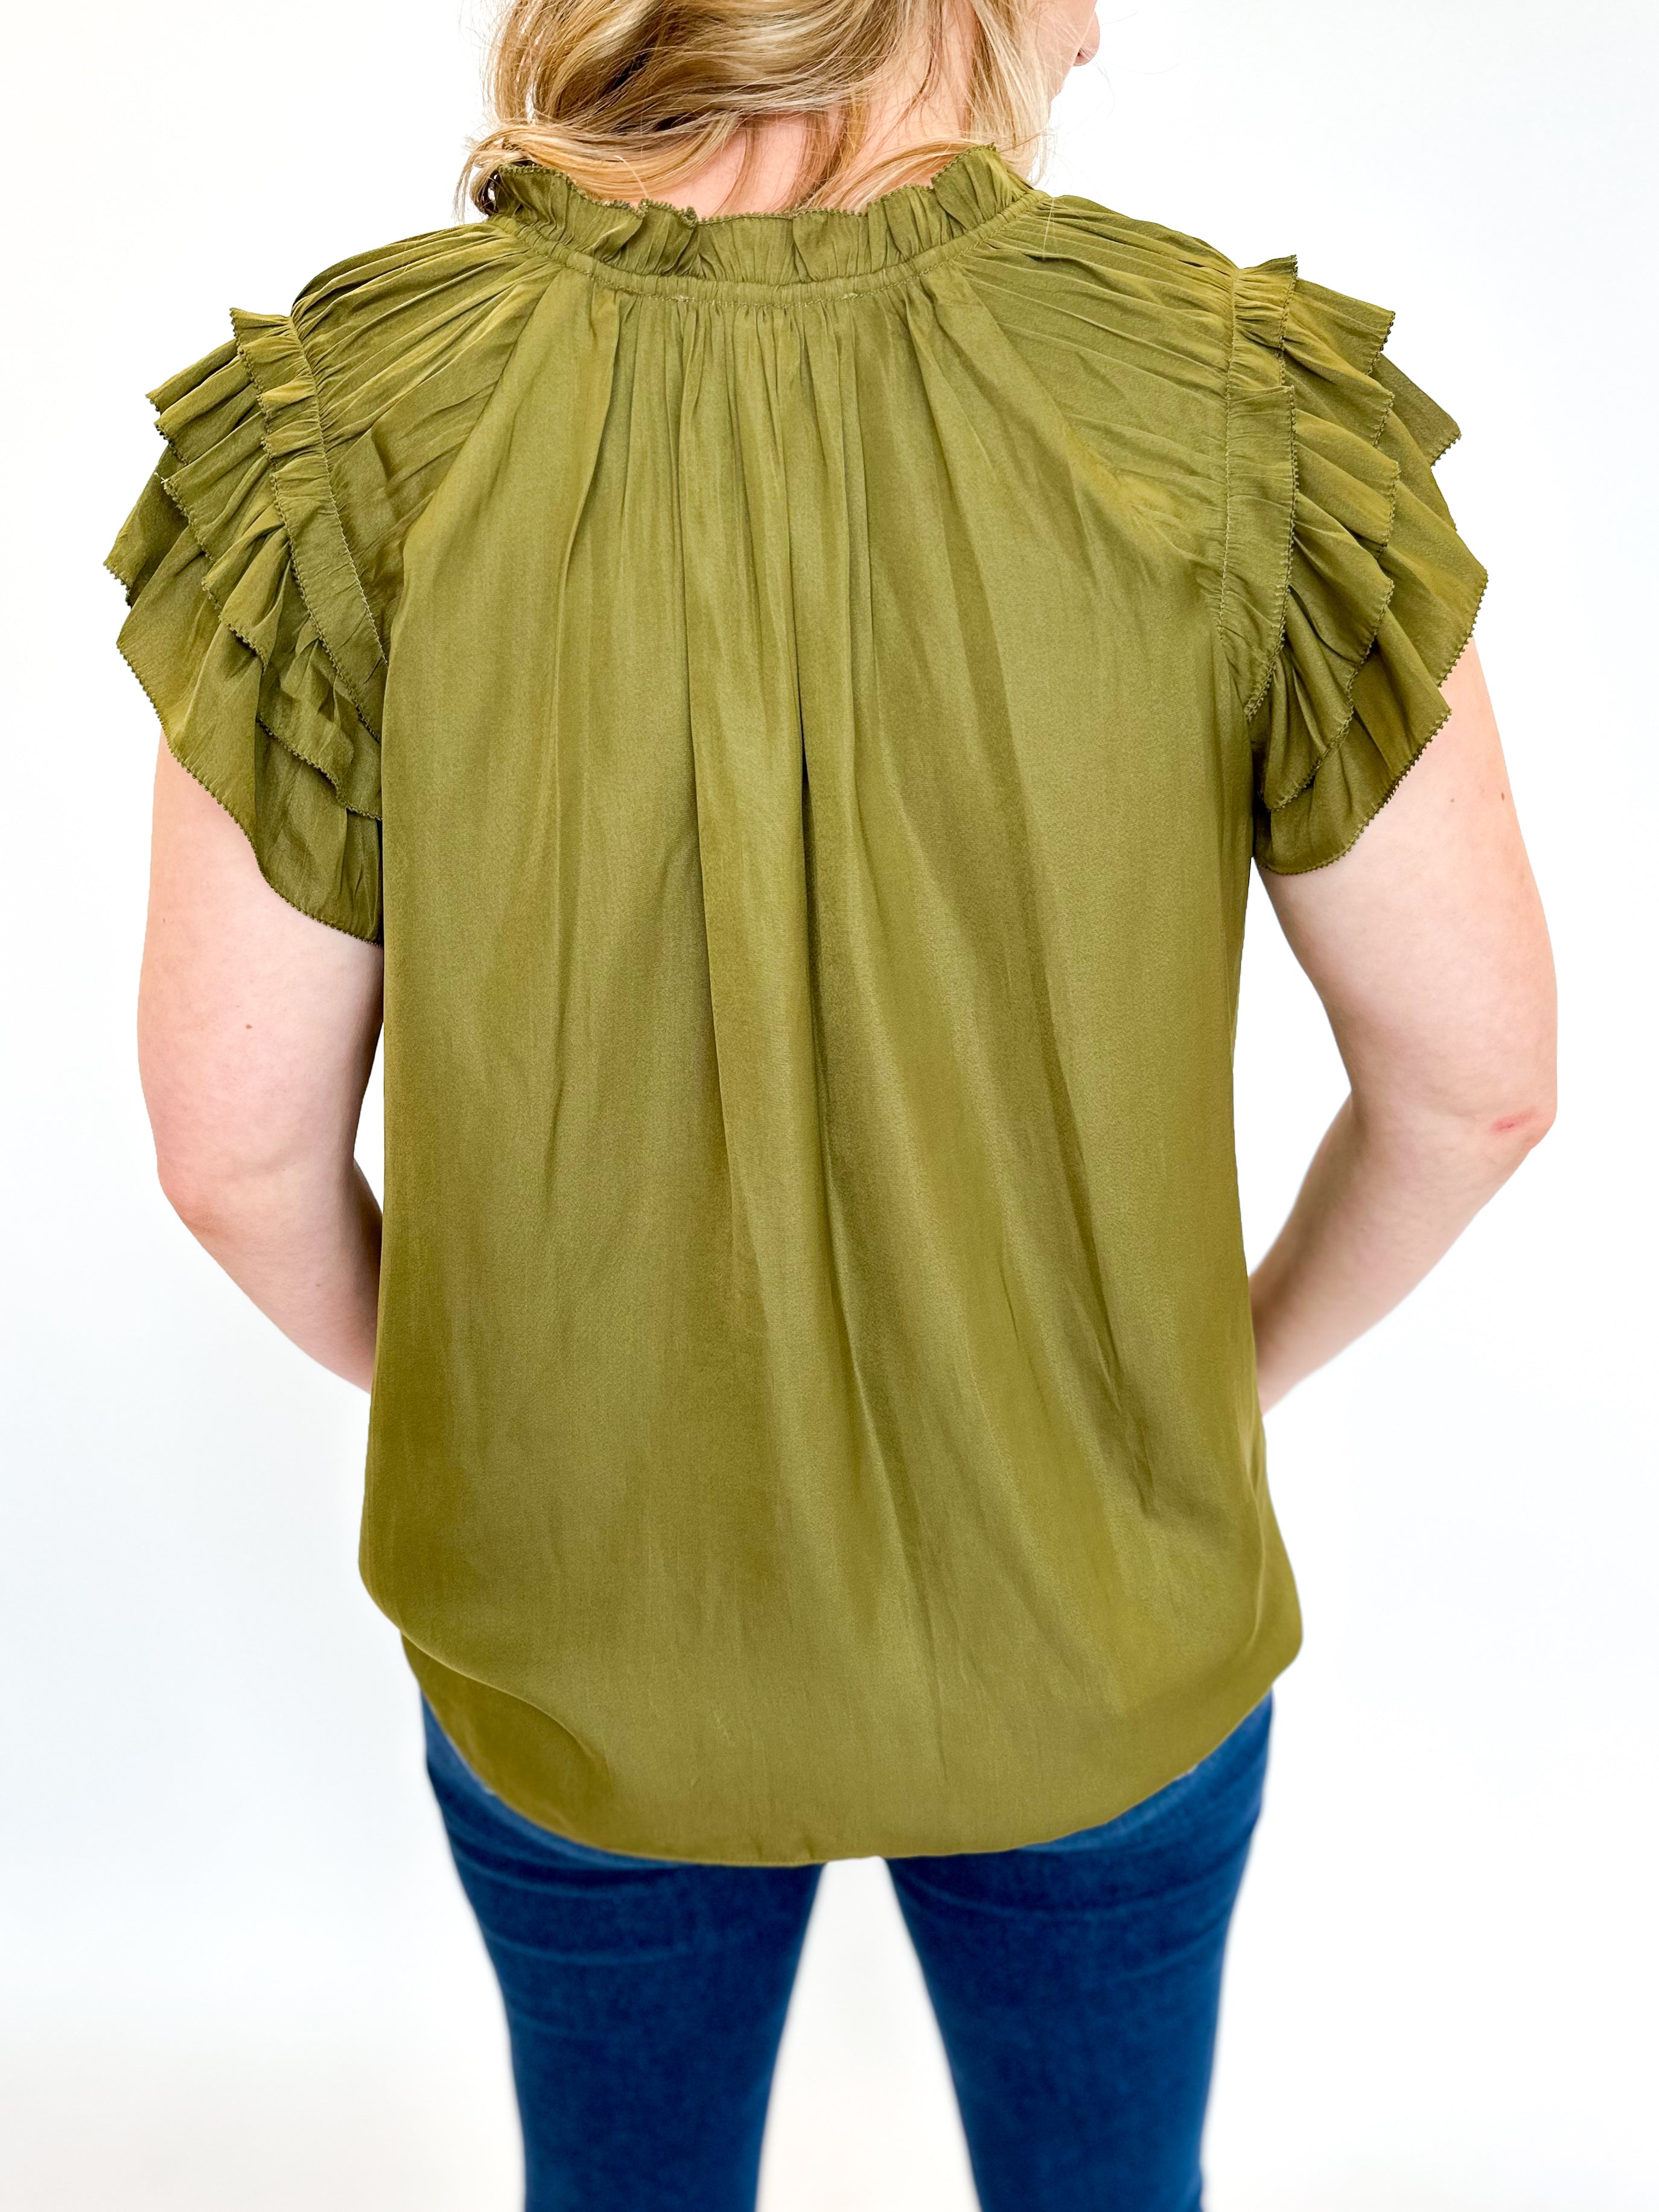 Your Holiday Satin Blouse - Mistletoe Green-200 Fashion Blouses-GRADE & GATHER-July & June Women's Fashion Boutique Located in San Antonio, Texas